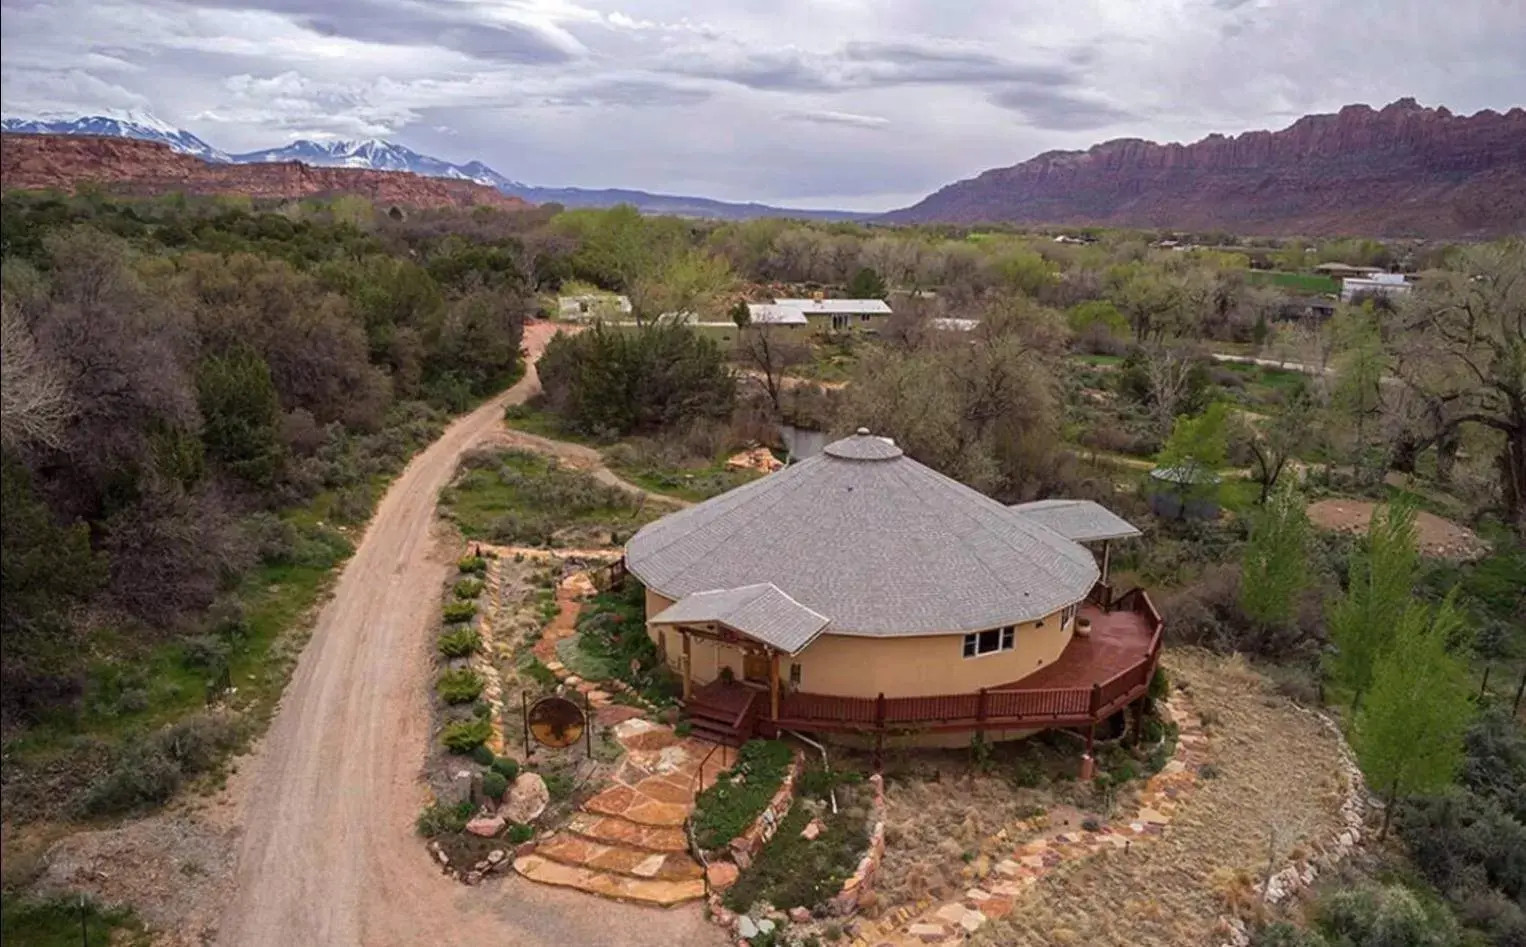 Bird's-eye View in Red Moon Lodge